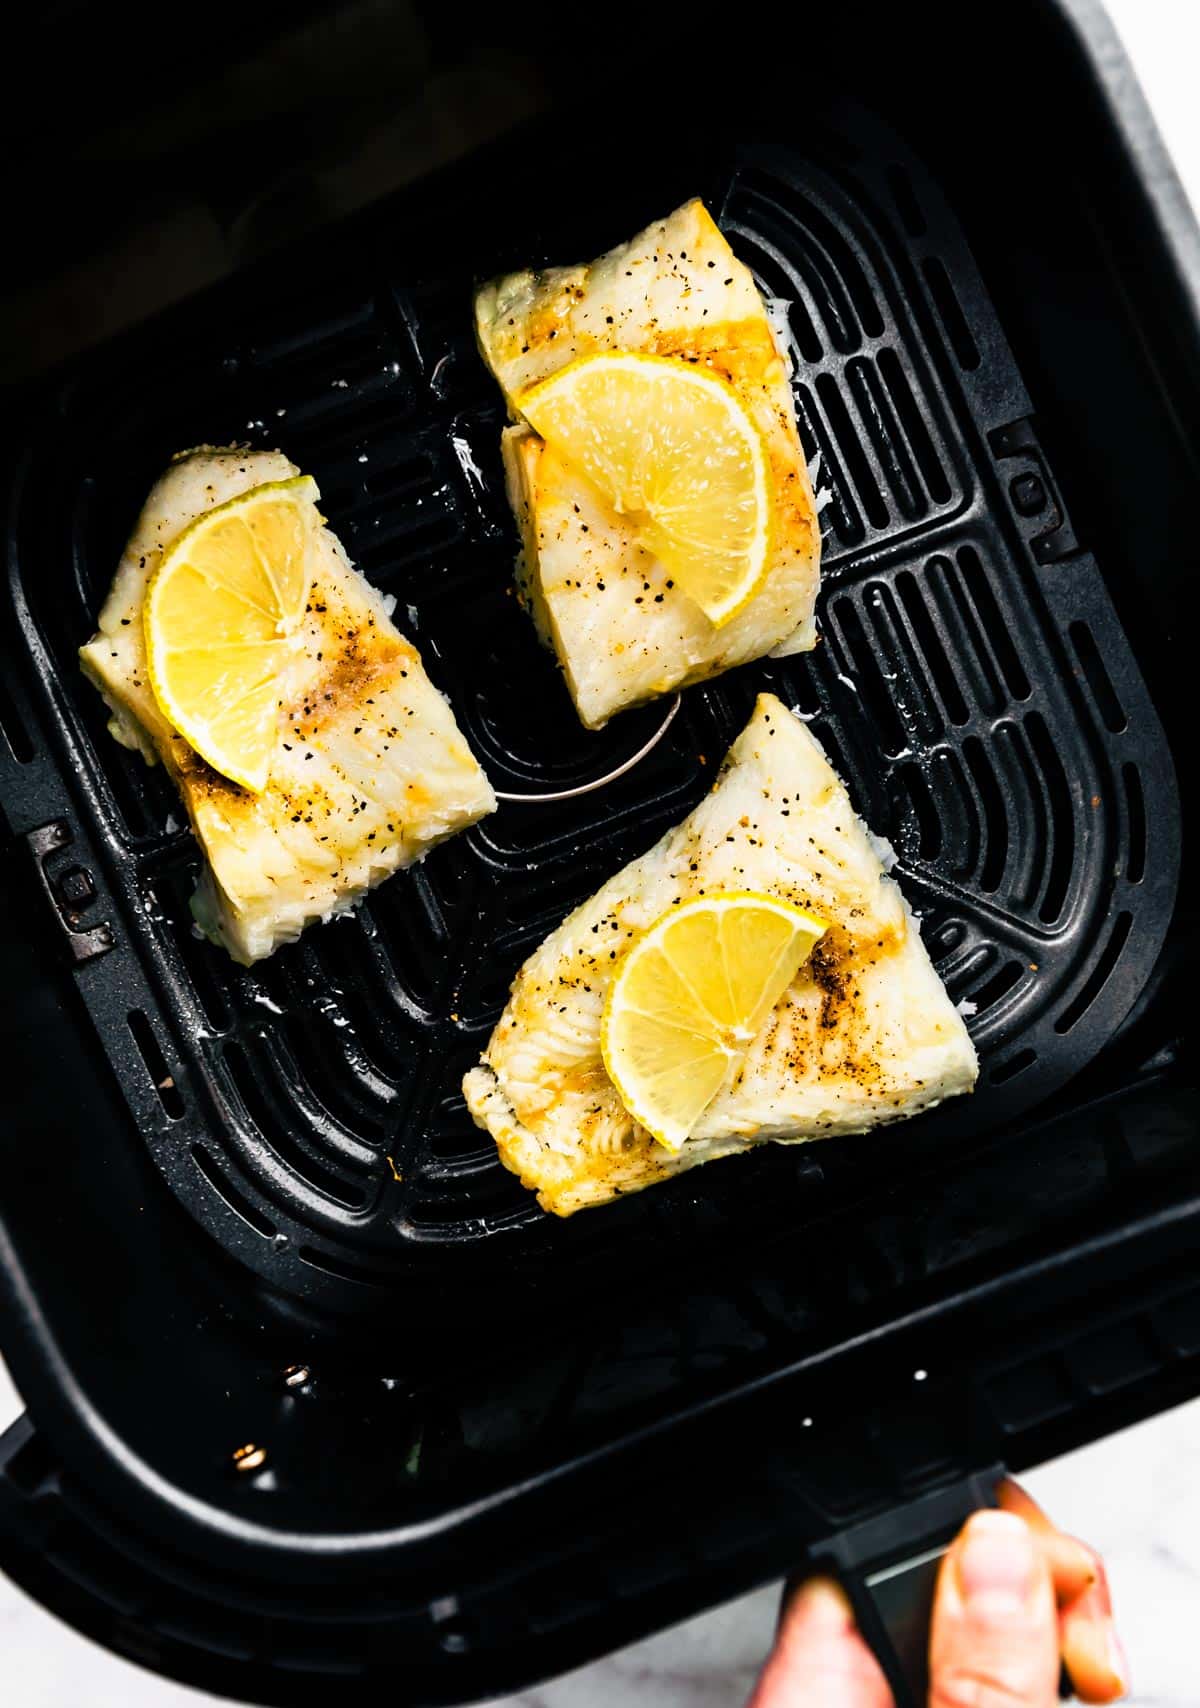 Three cooked fish fillets topped with lemon in an air fryer